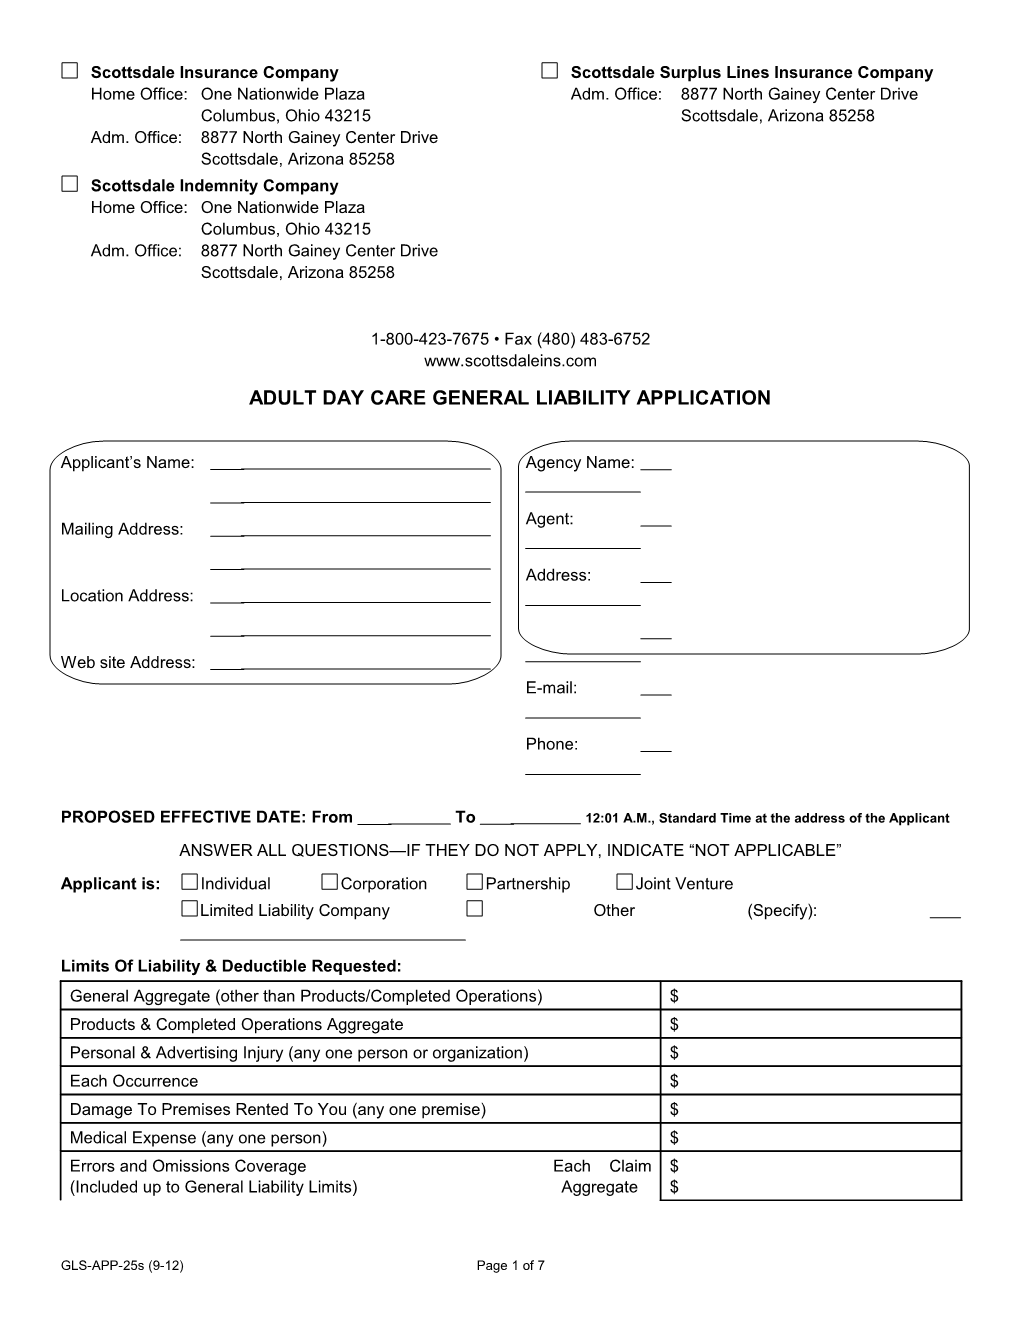 Adult Day Care General Liability Application